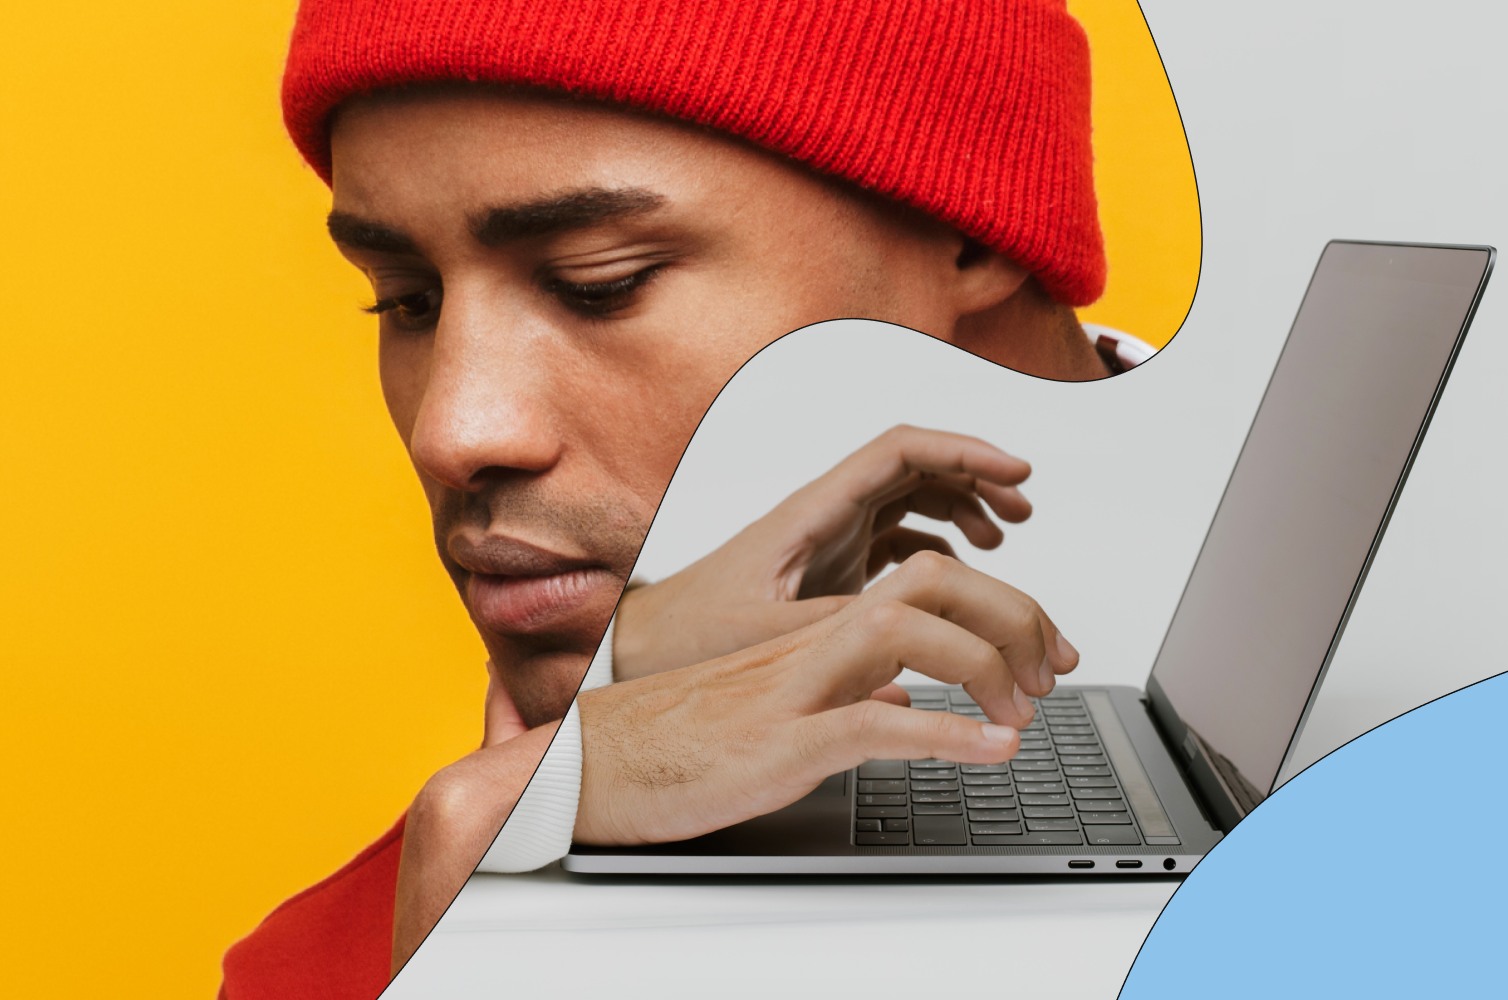 Man in a red beanie typing on a laptop, representing a modern learner